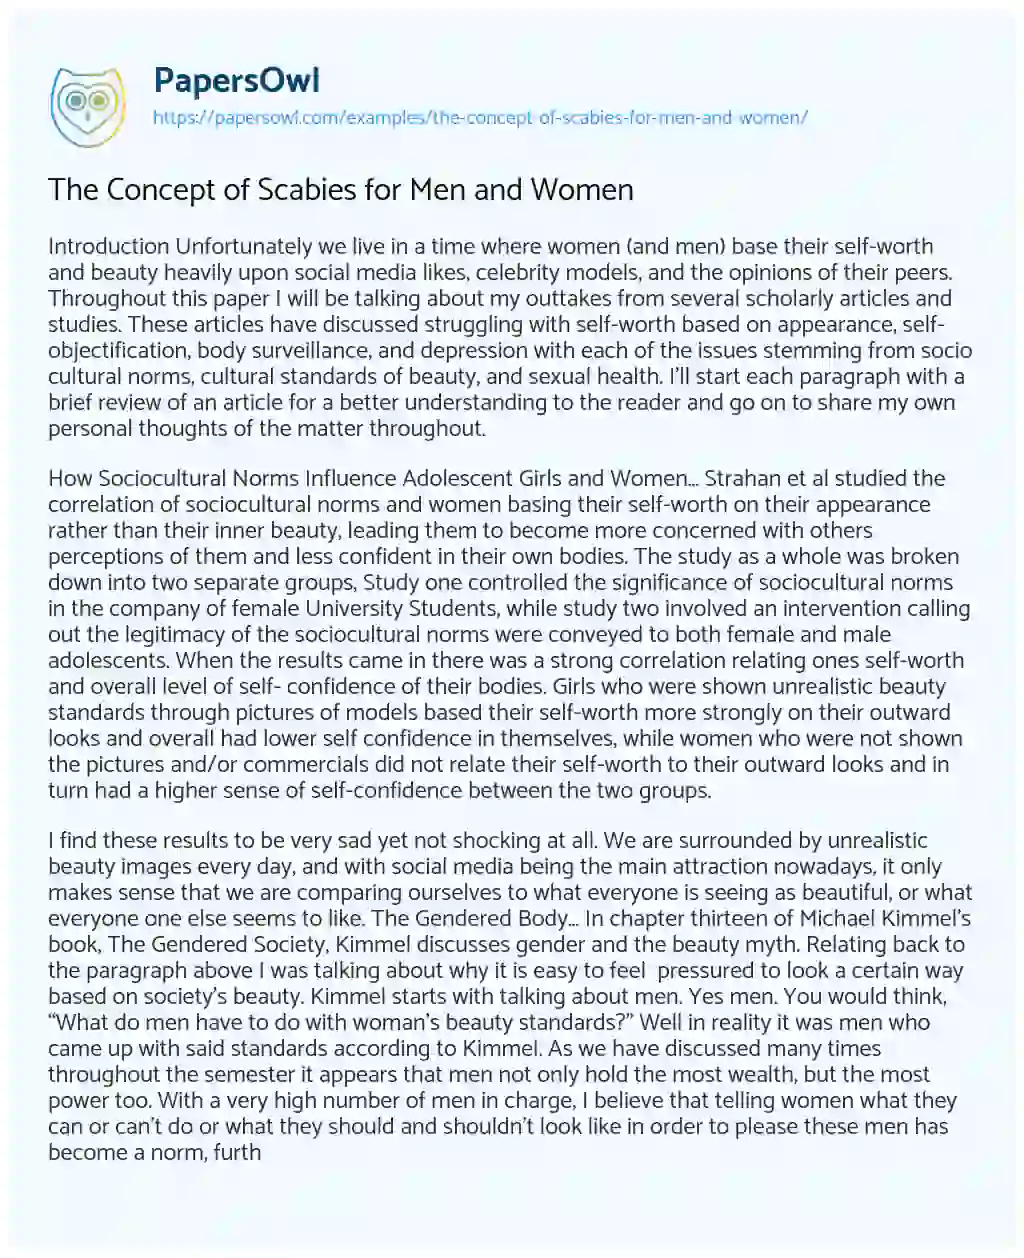 Essay on The Concept of Scabies for Men and Women